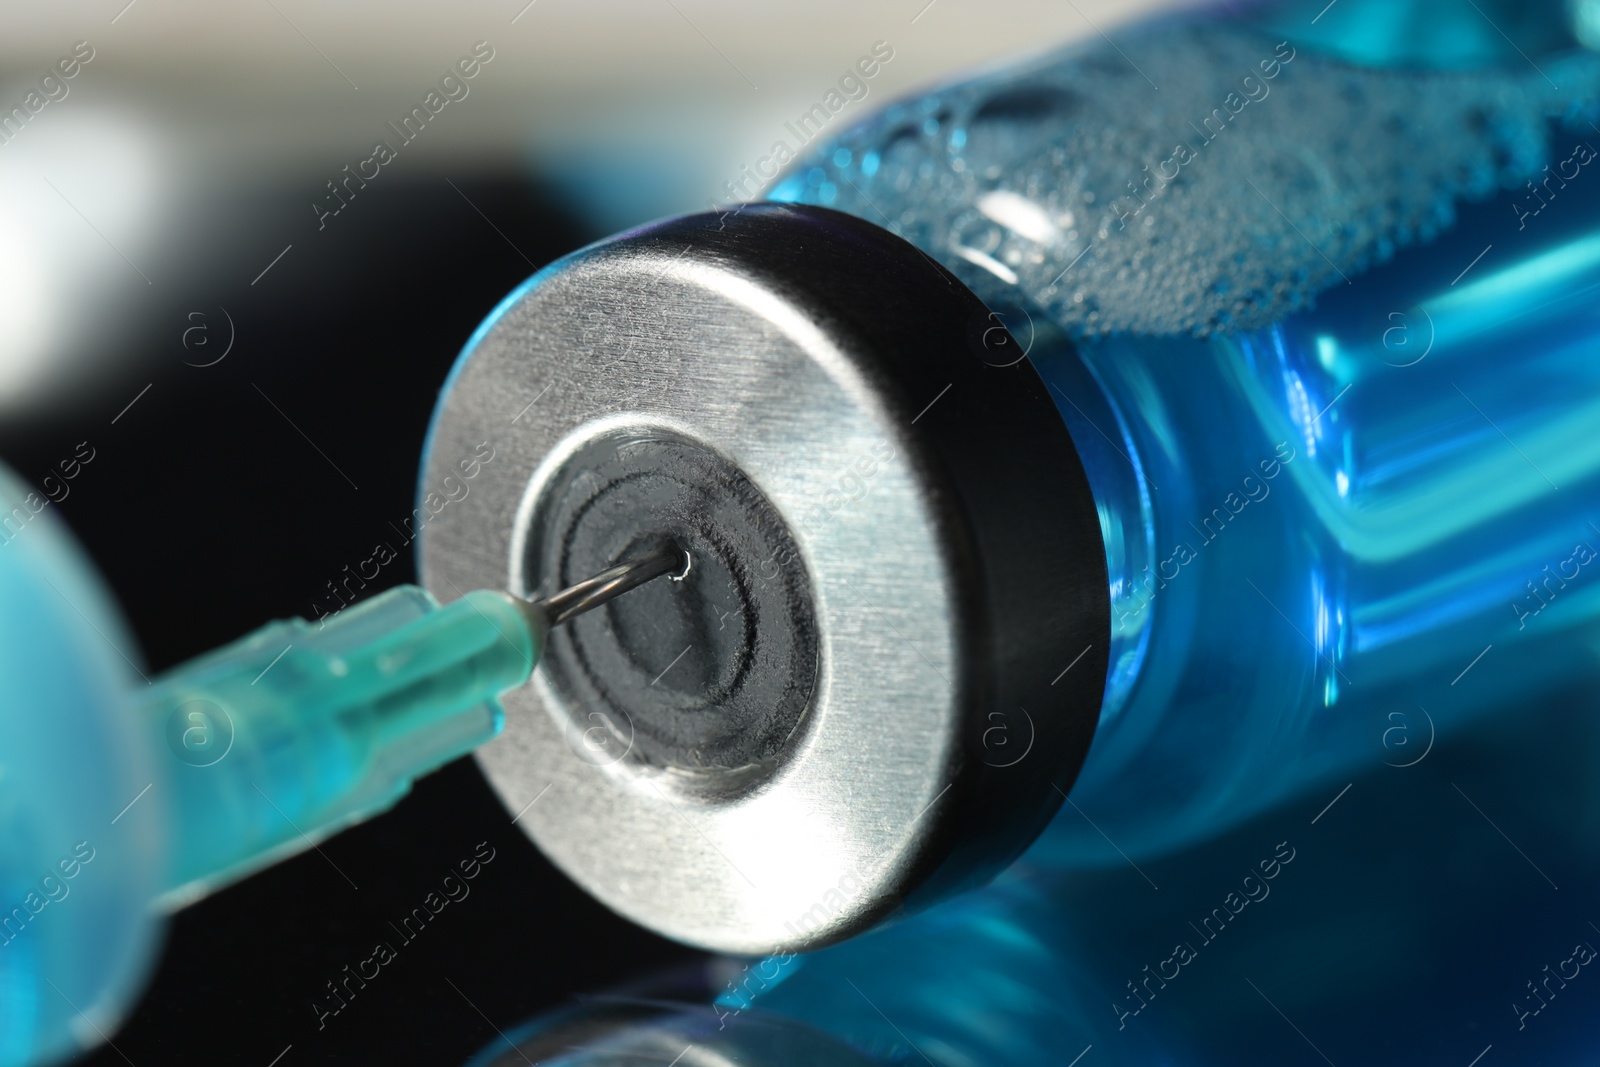 Photo of Filling syringe with medicine from vial on table, closeup